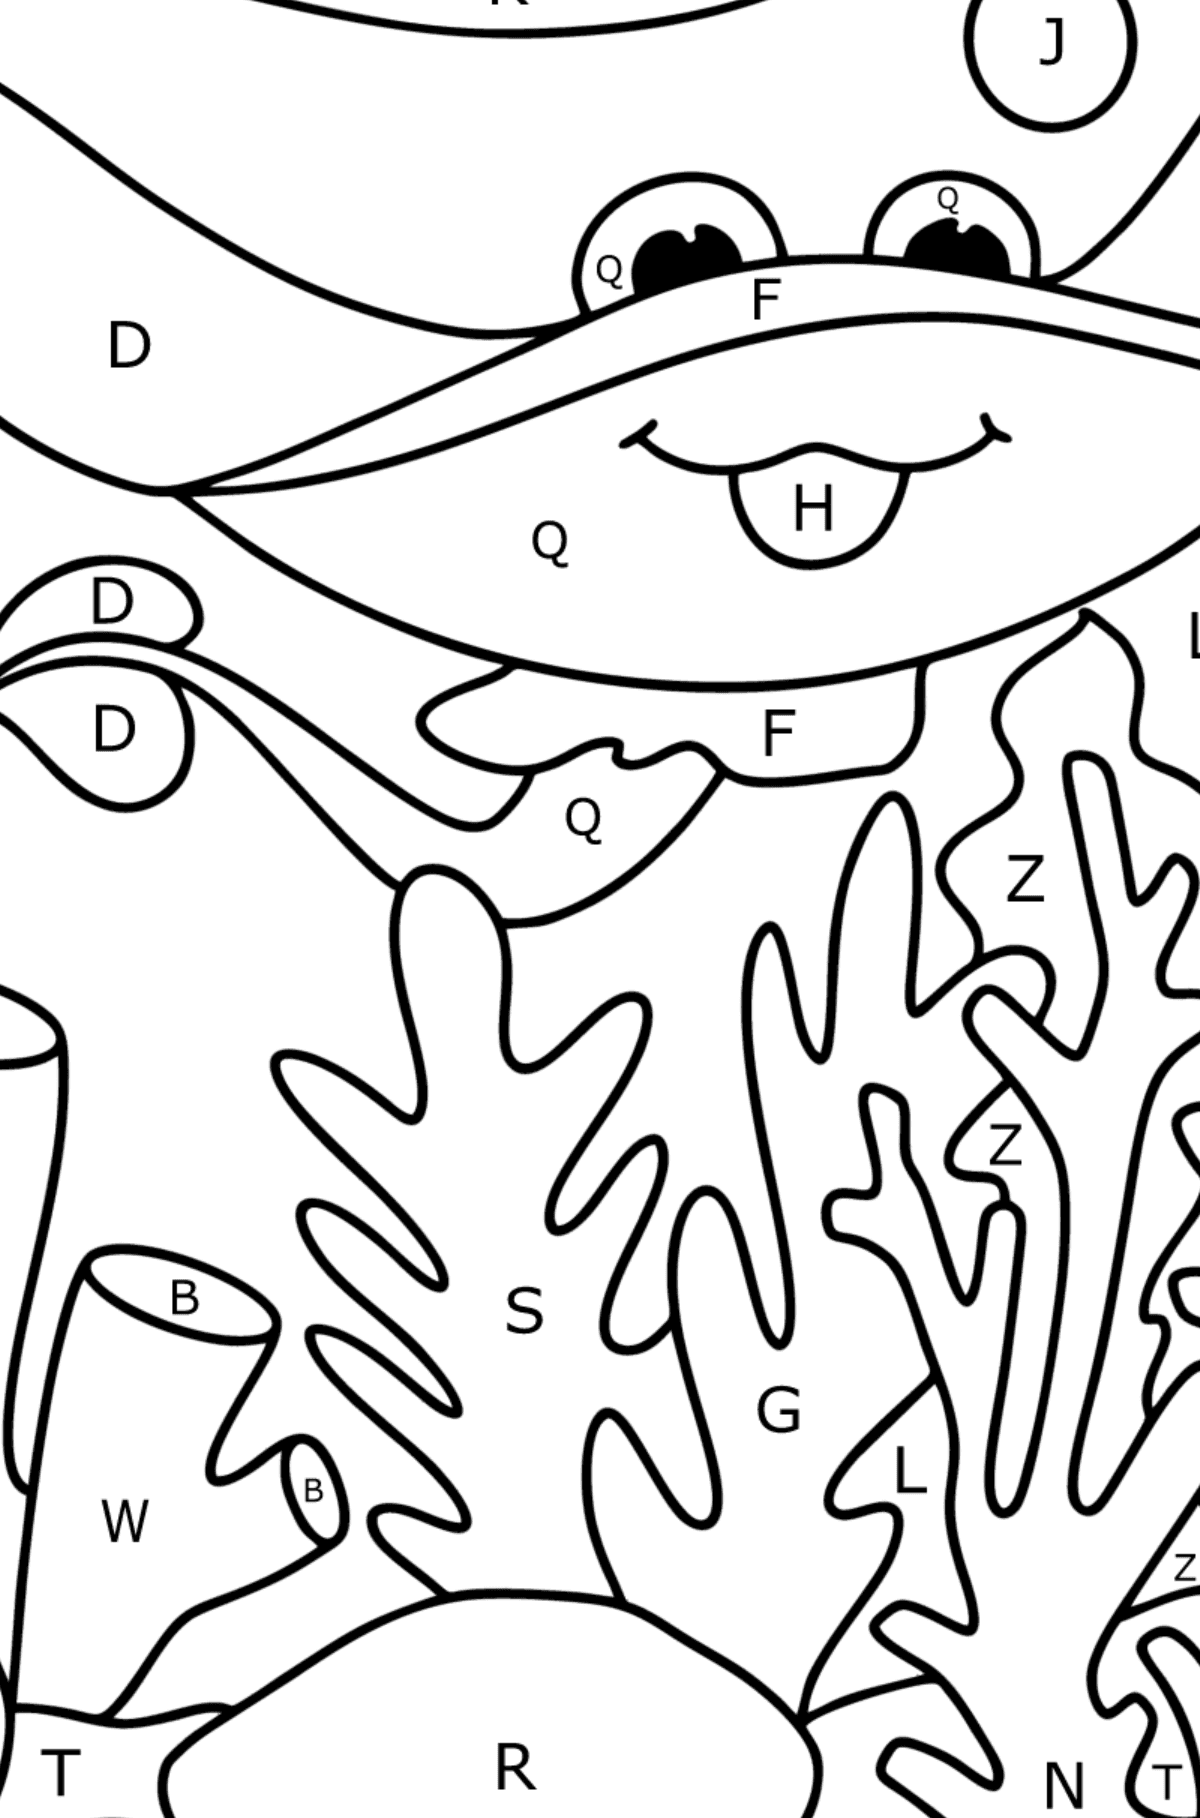 Stingray coloring page - Coloring by Letters for Kids